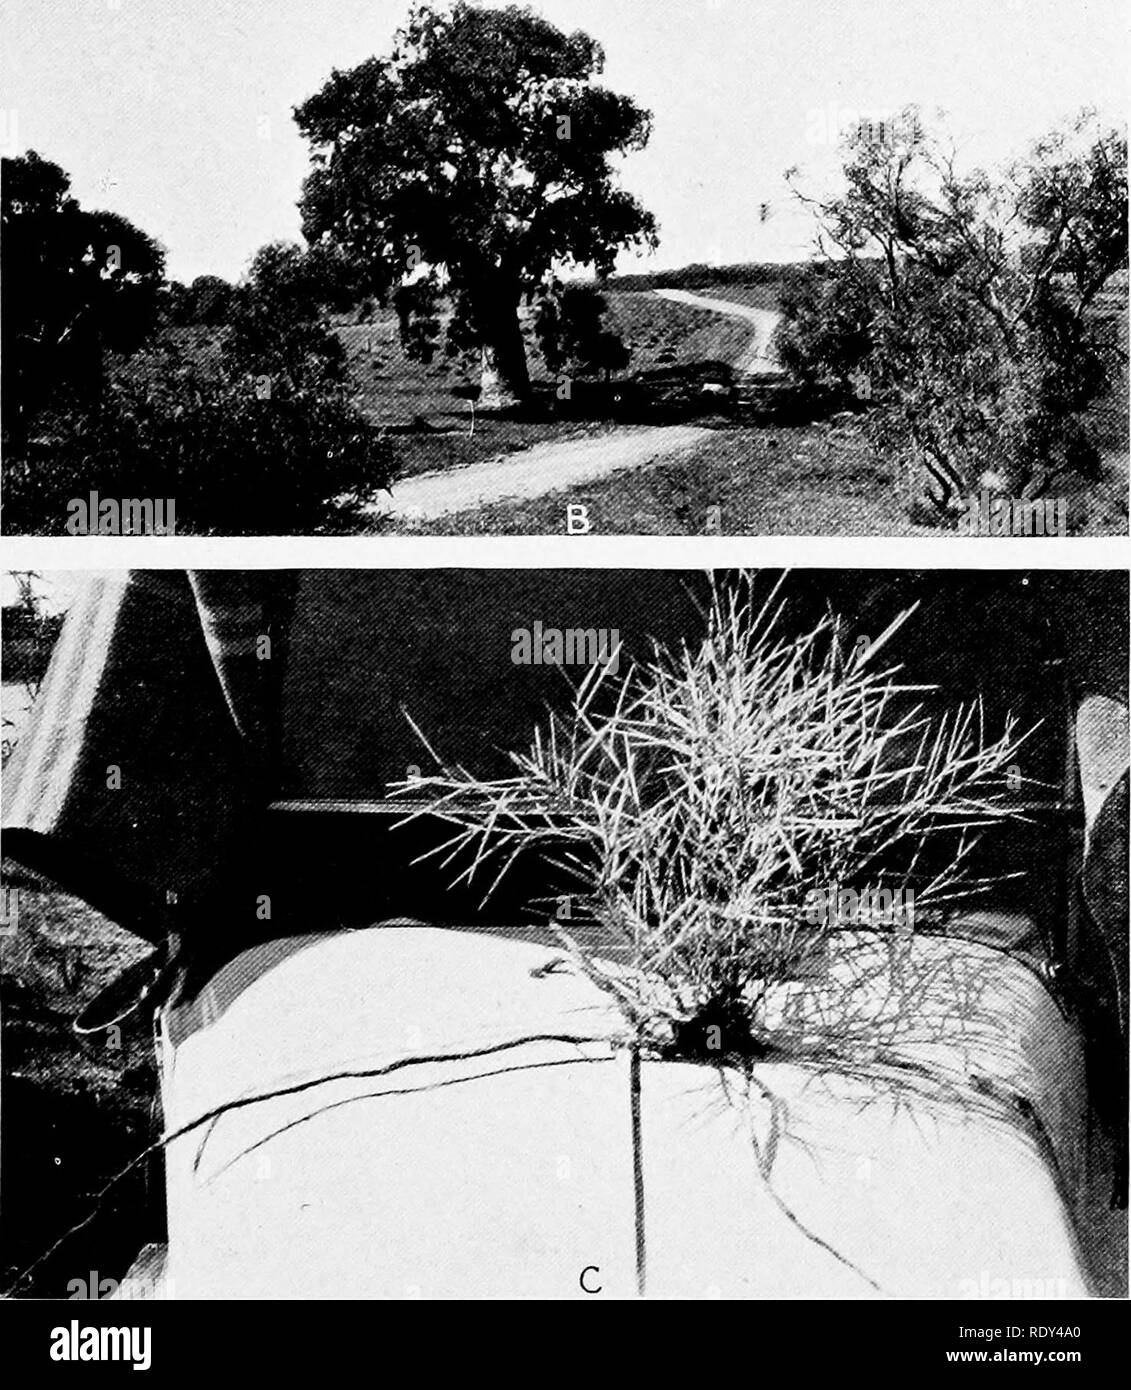 . Plant habits and habitats in the arid portions of South Australia. Plant ecology; Botany; Desert plants. B. C. Community of Acacia pycnaniha, the golden wattle, by a streamway on the Mount Brown road, Quorn. Large specimen of Eucalyptus leucoxylon var. pauperita by a wash on the Mount Arden road, Quorn. A comparison with the automobile will give an idea of its size. Vegetative reproduction in Hakea leucoptera. A young shoot, removed from the soil, is shown taking its origin from a horizontal root. Quorn,. Please note that these images are extracted from scanned page images that may have been Stock Photo